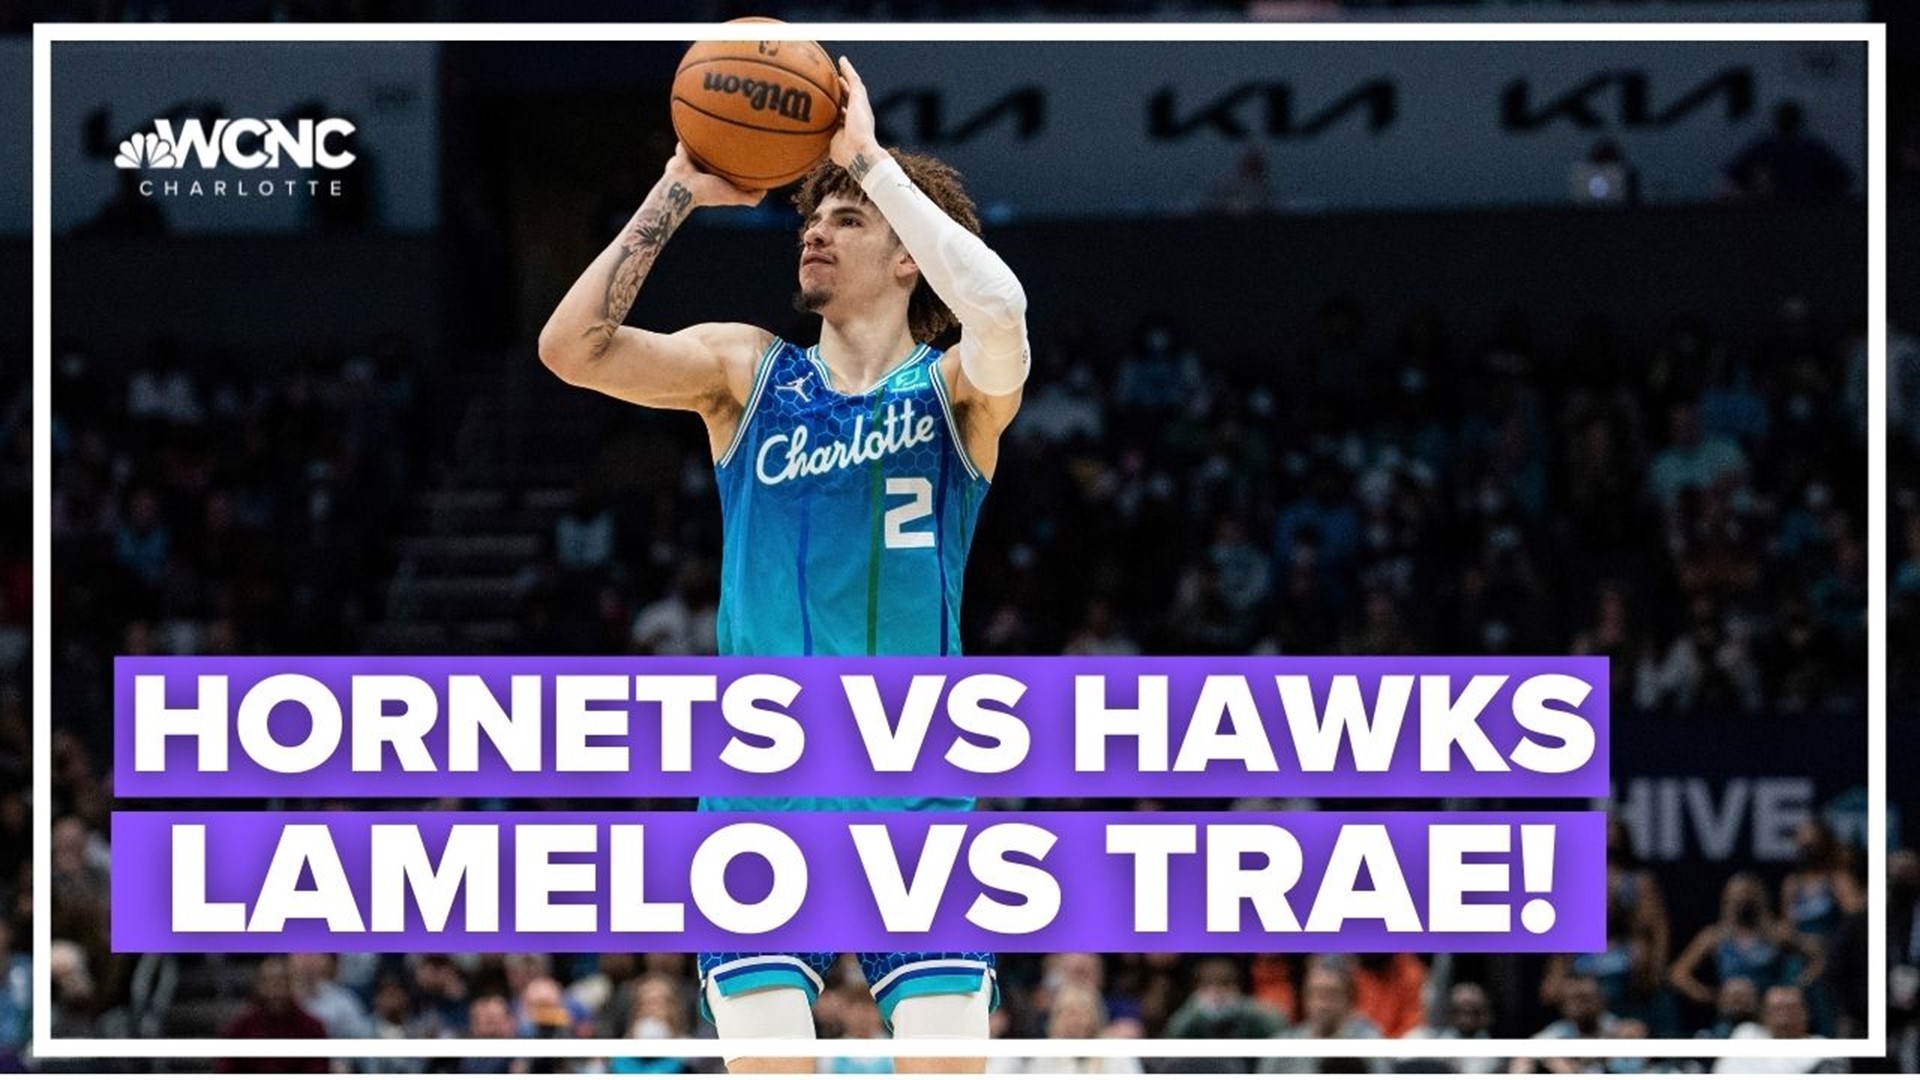 Locked On Hornets host Walker Mehl joins WCNC Charlotte's Nick Carboni to talk LaMelo Ball vs. Trae Young and the Hornets' play-in game at the Hawks.